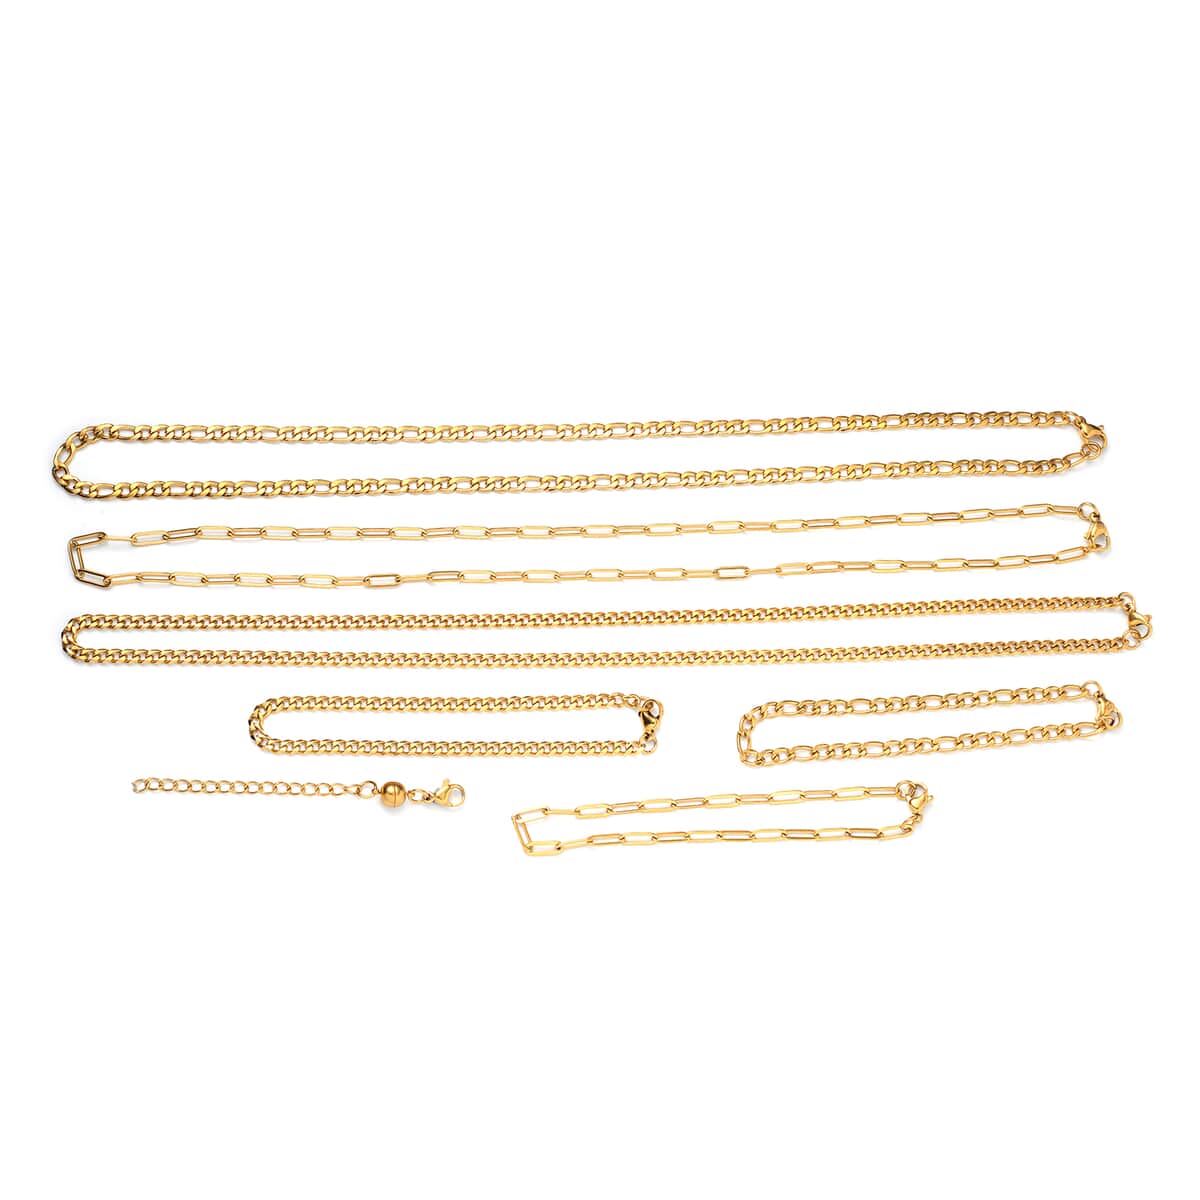 Ankur Treasure Chest Set of 7, Figaro, Paper Clip and Cable Chain 3pcs Necklace 20 Inches, 3pcs Bracelet (7.5-8.0In) and 1pc Magnetic Lock in ION Plated YG Stainless Steel image number 0